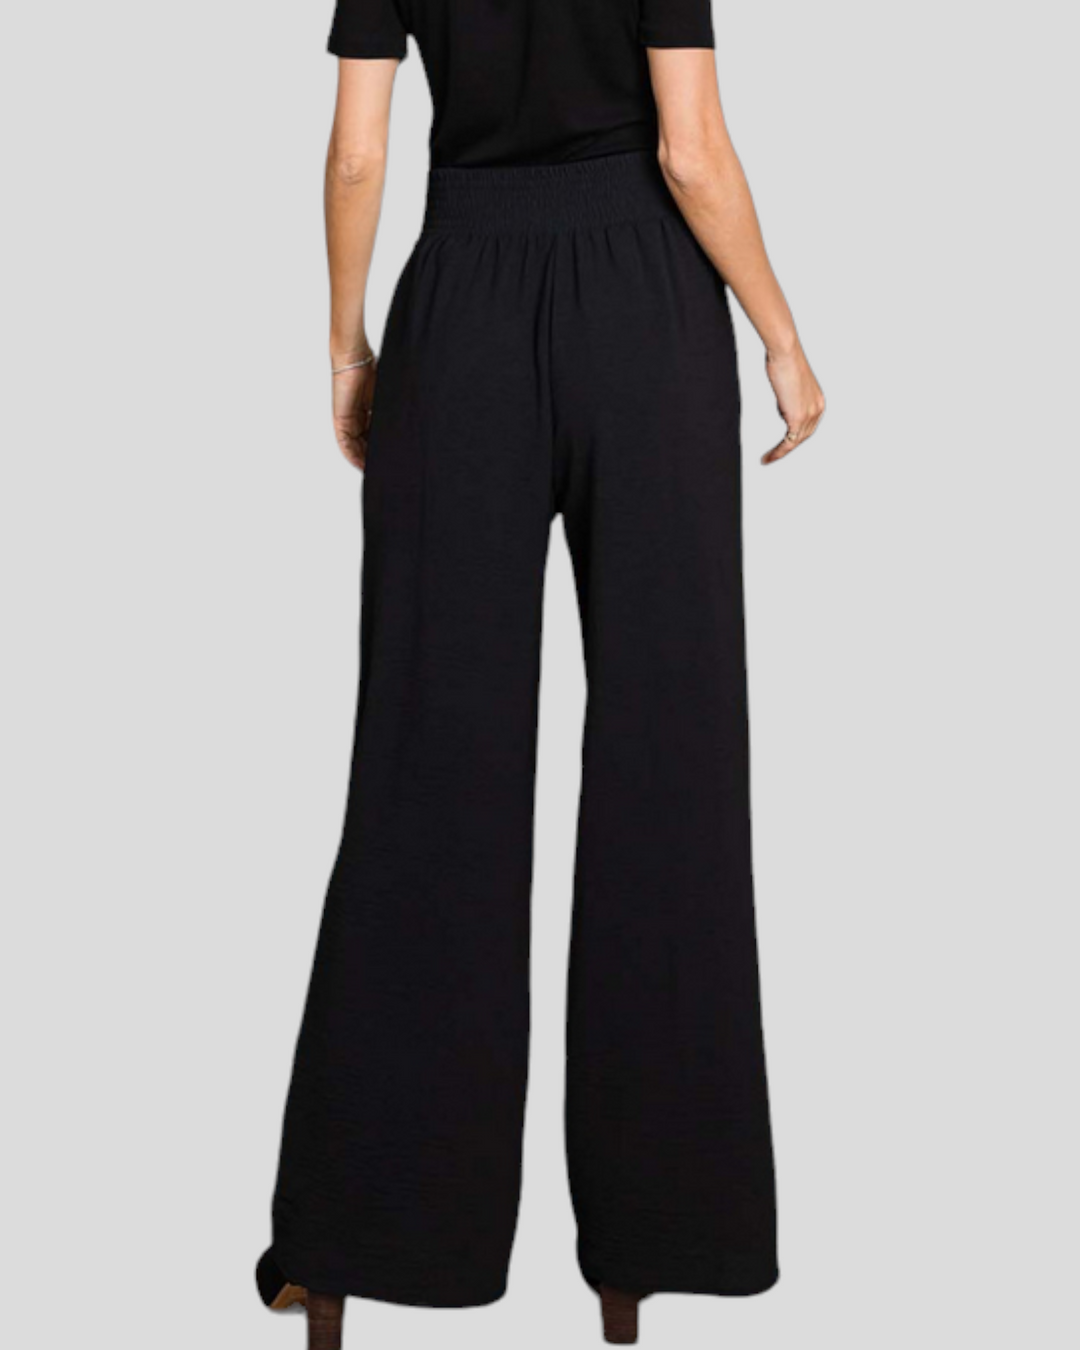 Relaxed Smocked Waist Pant